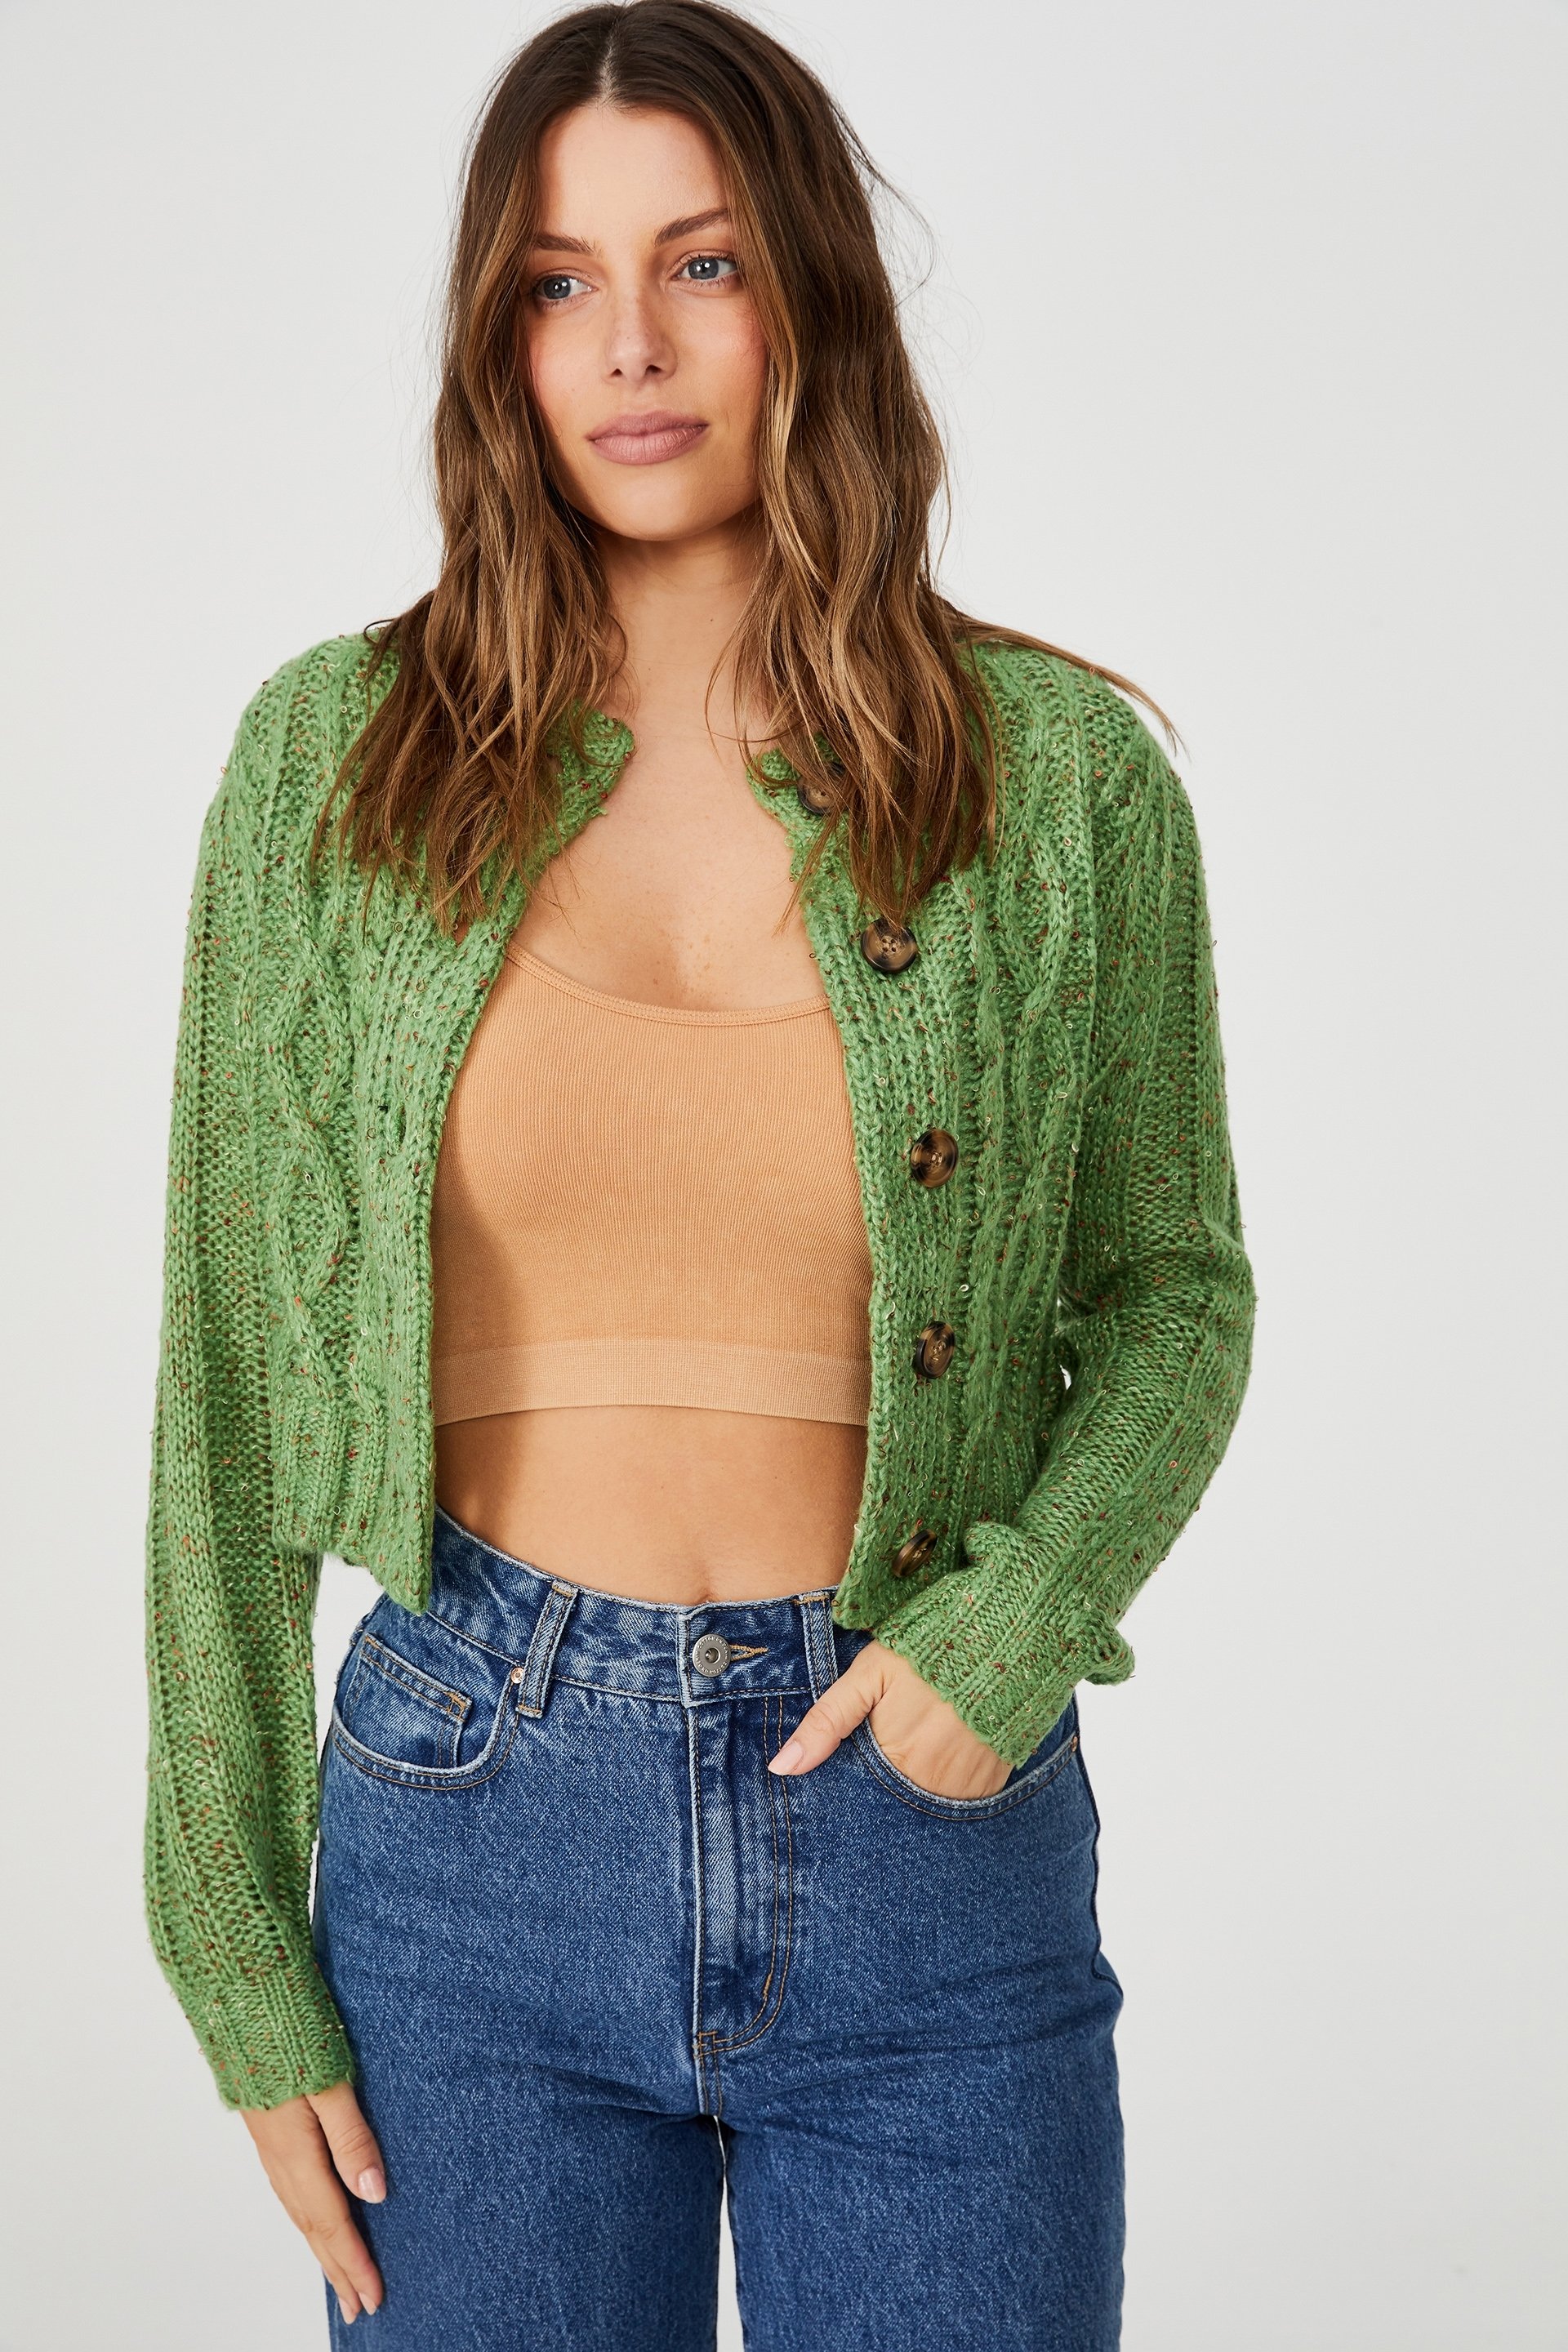 Cotton On Women - In The Mix Cabin Cable Crew Cardigan - Pistachio